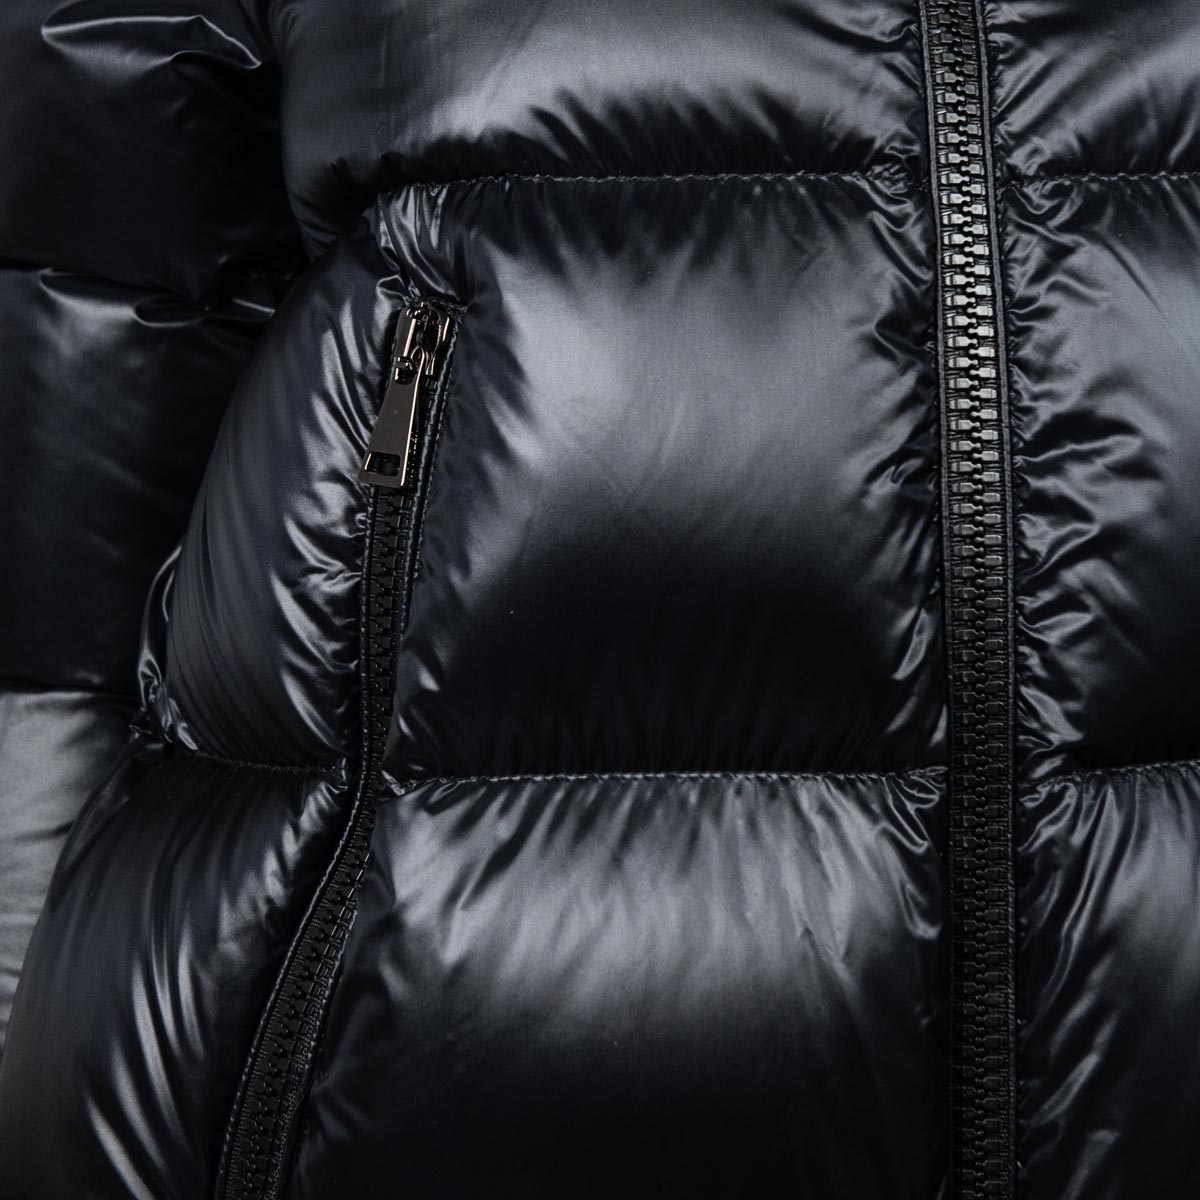 Moncler Black Quilted Serifur Fur Trim Hooded Down Parka Size S | 1 - Love that Bag etc - Preowned Authentic Designer Handbags & Preloved Fashions